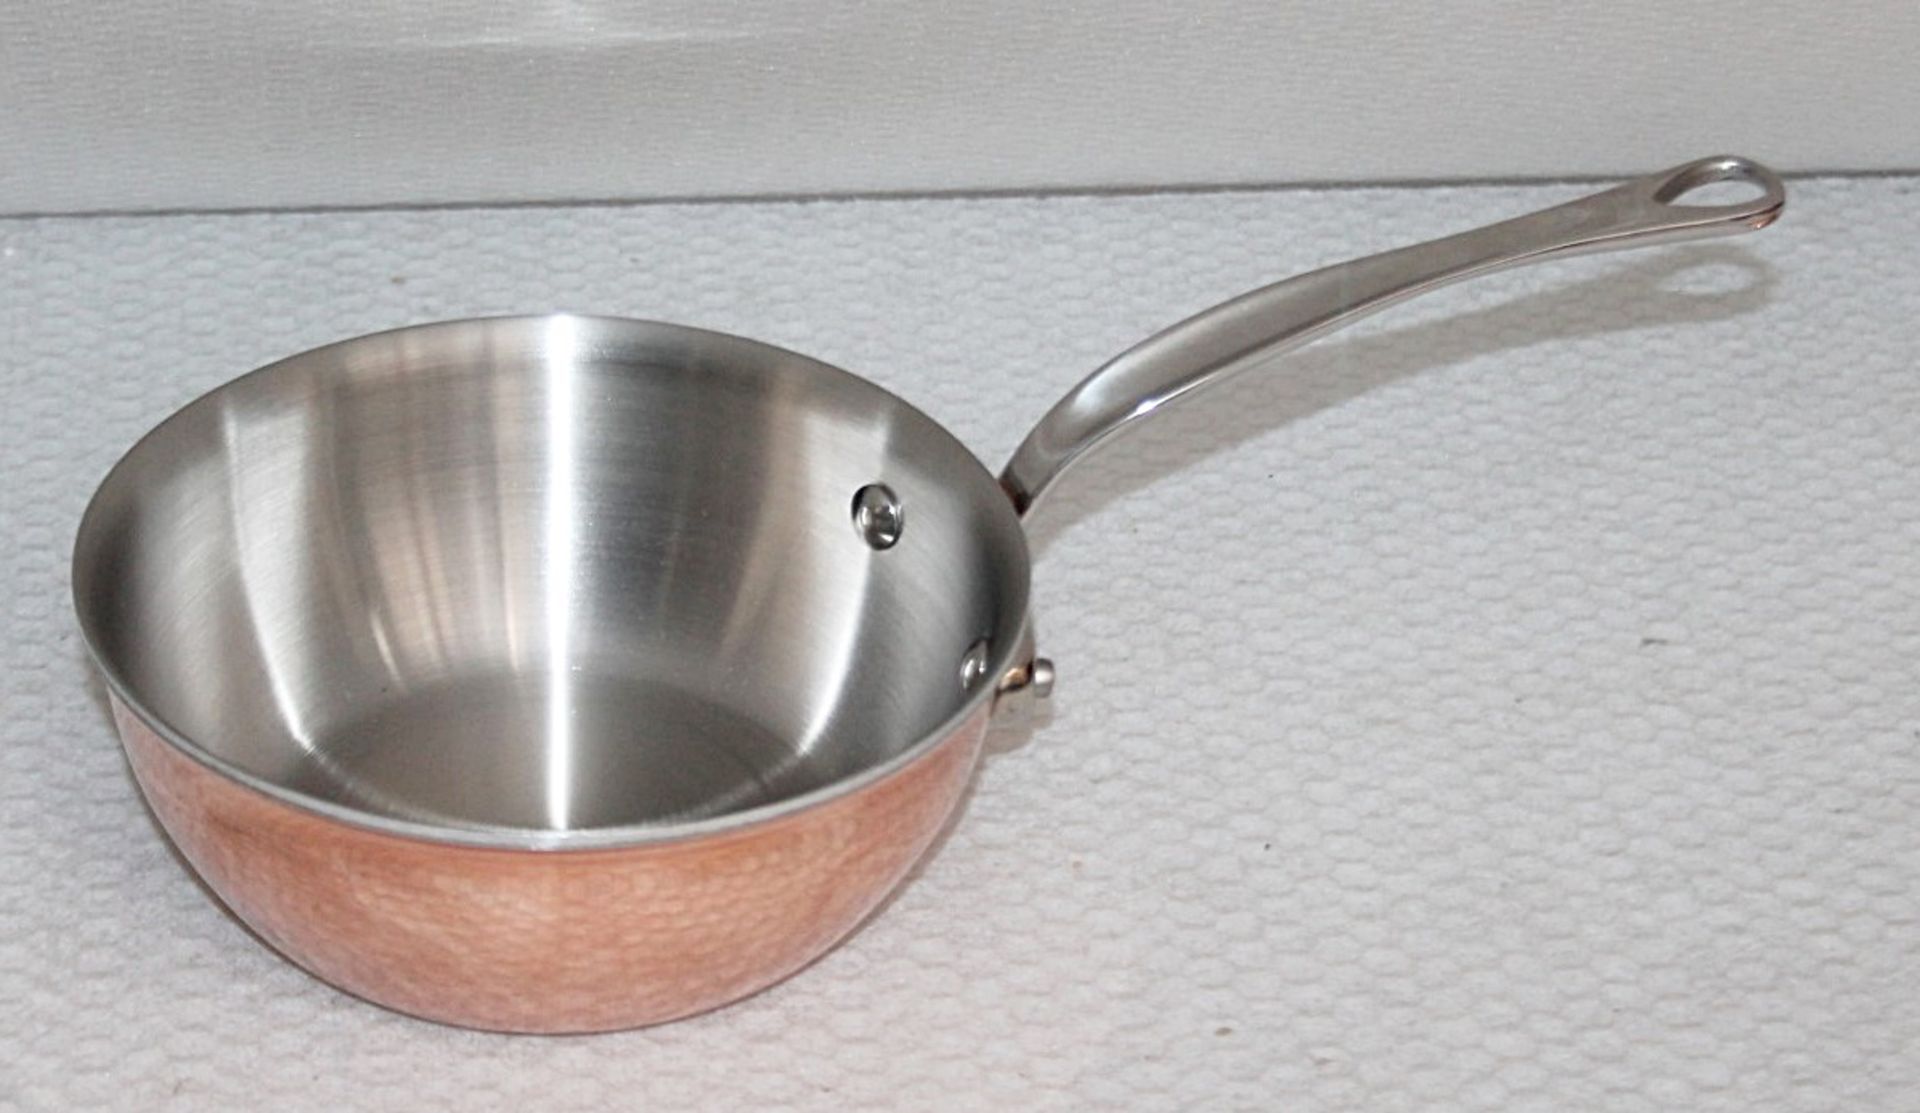 1 x MAUVEL 1830 Quart Splayed Saute Pan with Lid and Cast Stainless Steel Handle - RRP £300.00 - Image 4 of 9